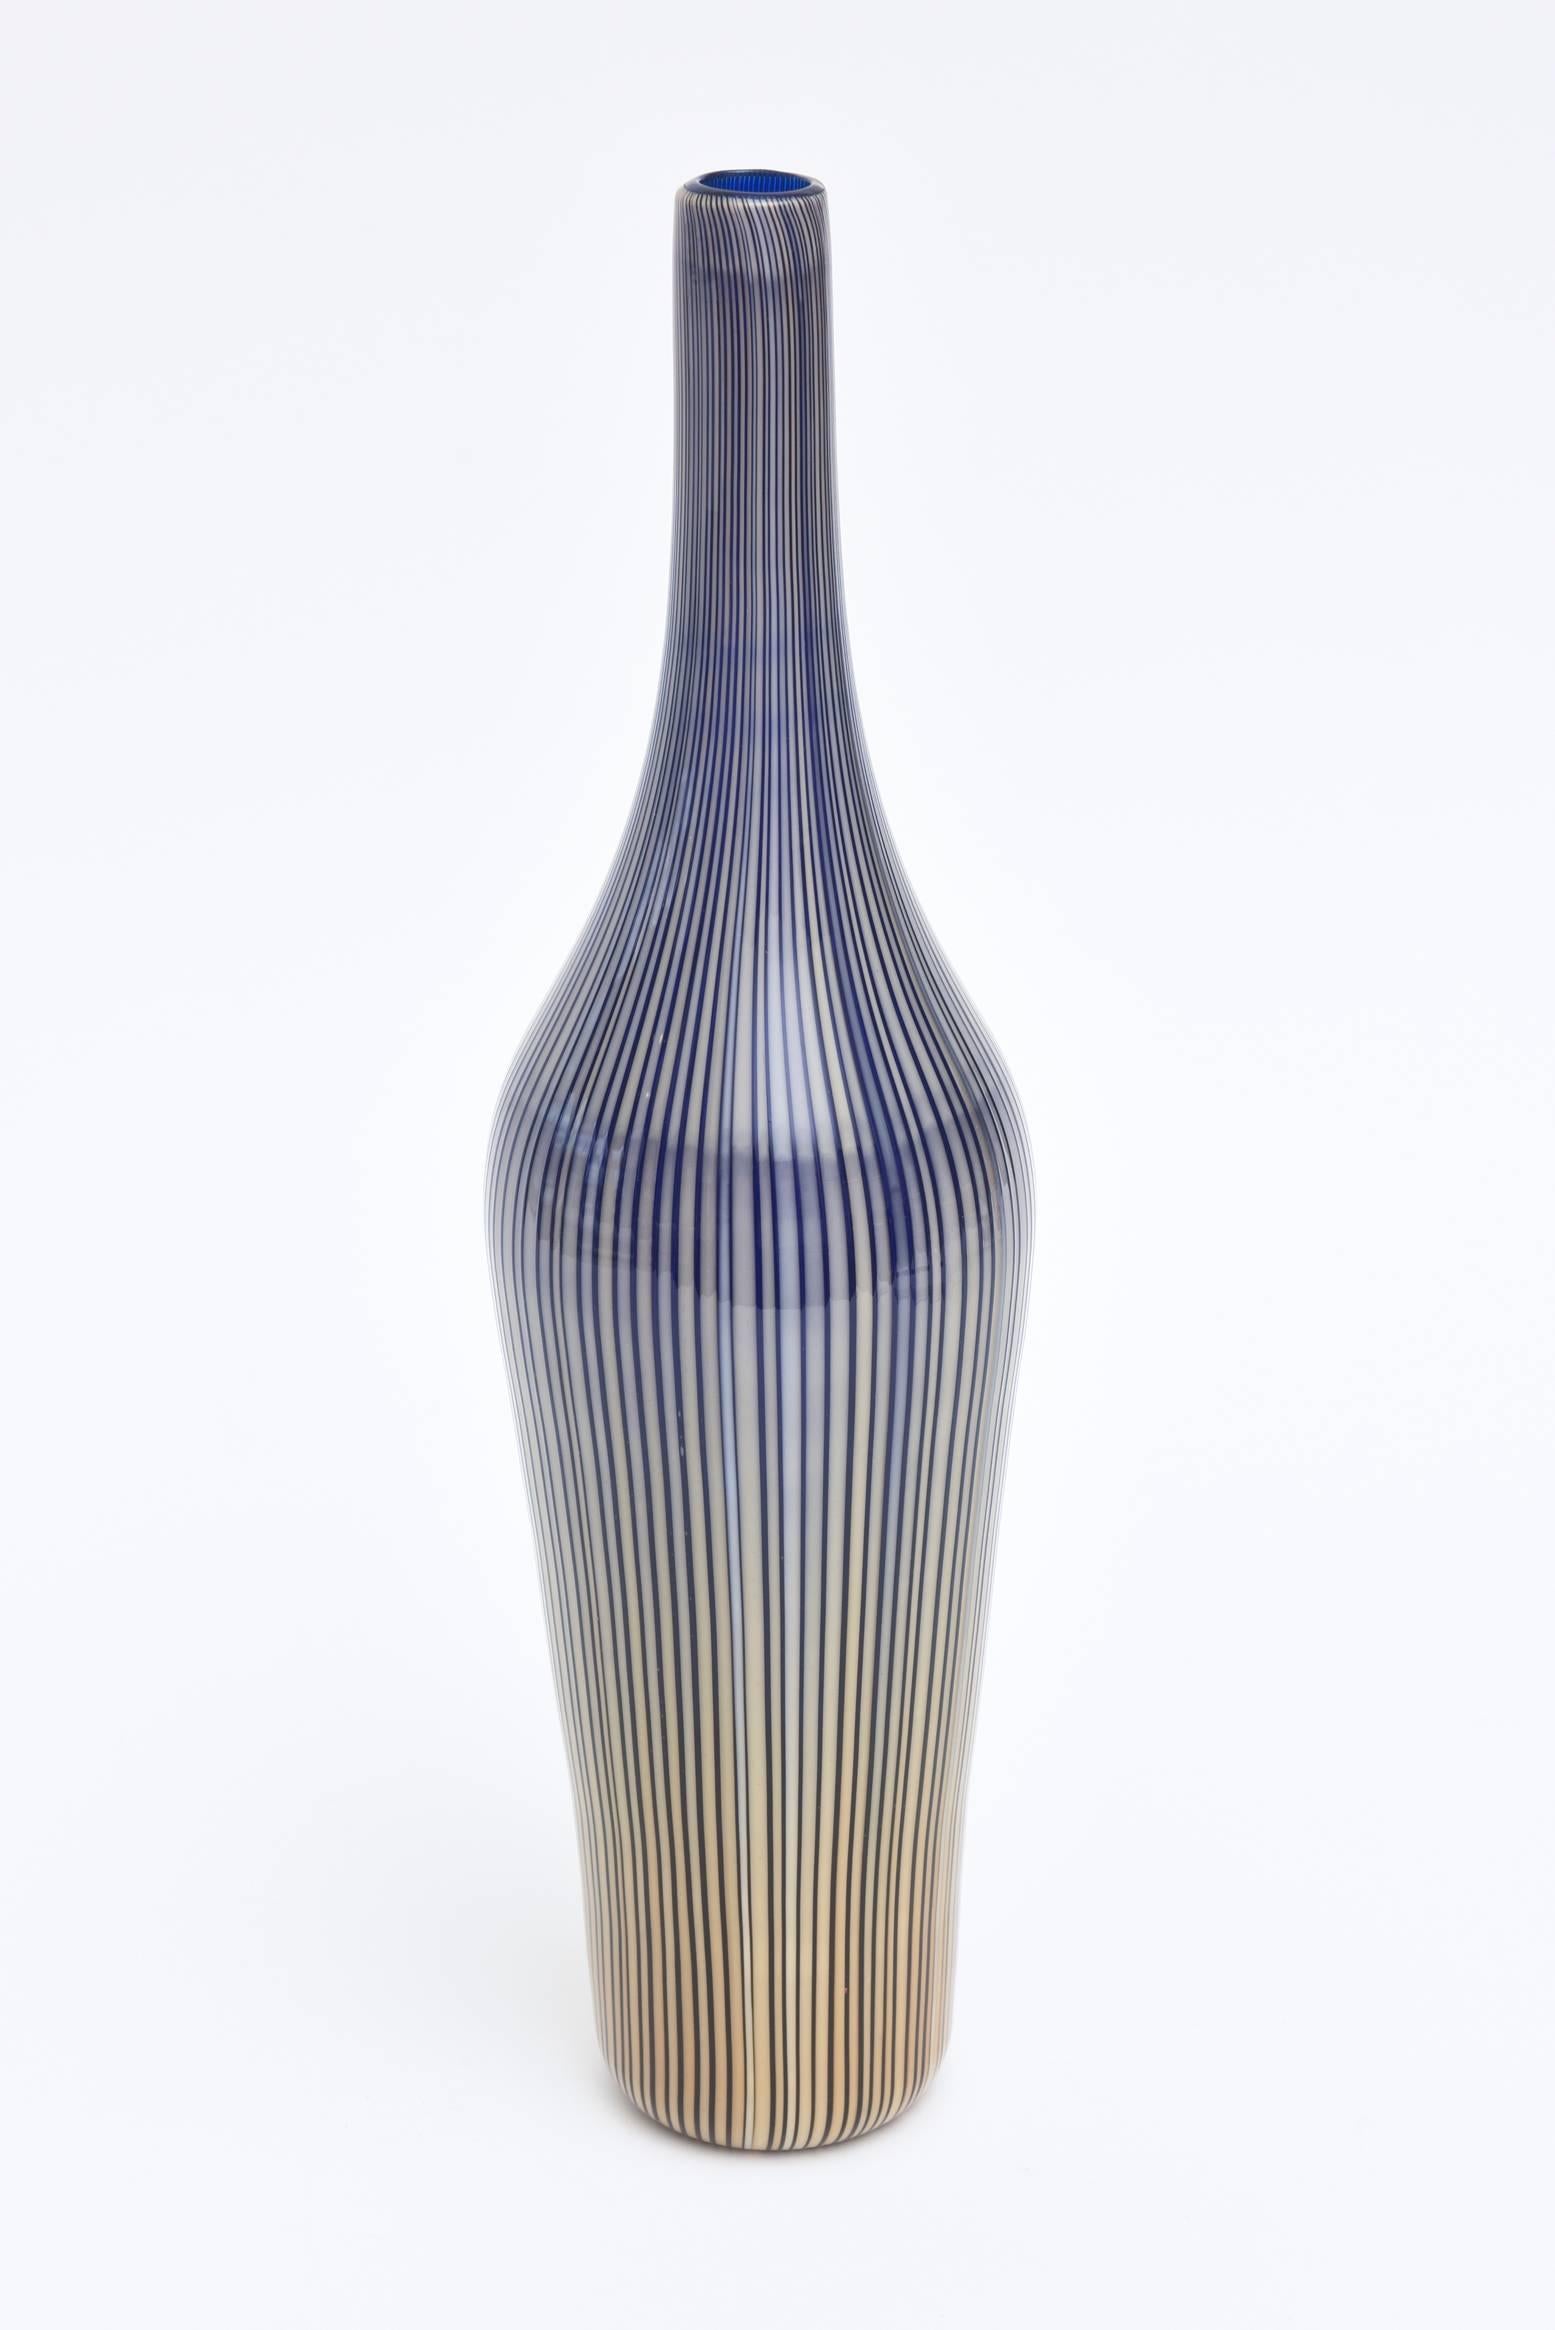 This beautiful Italian Murano stately Cenedese striped cased bottle, vessel or glass sculpture are graduated colors of blue to amber yellows is triple cased glass. It is a decorative piece of sculptural glass or vessel in bottle form. The original